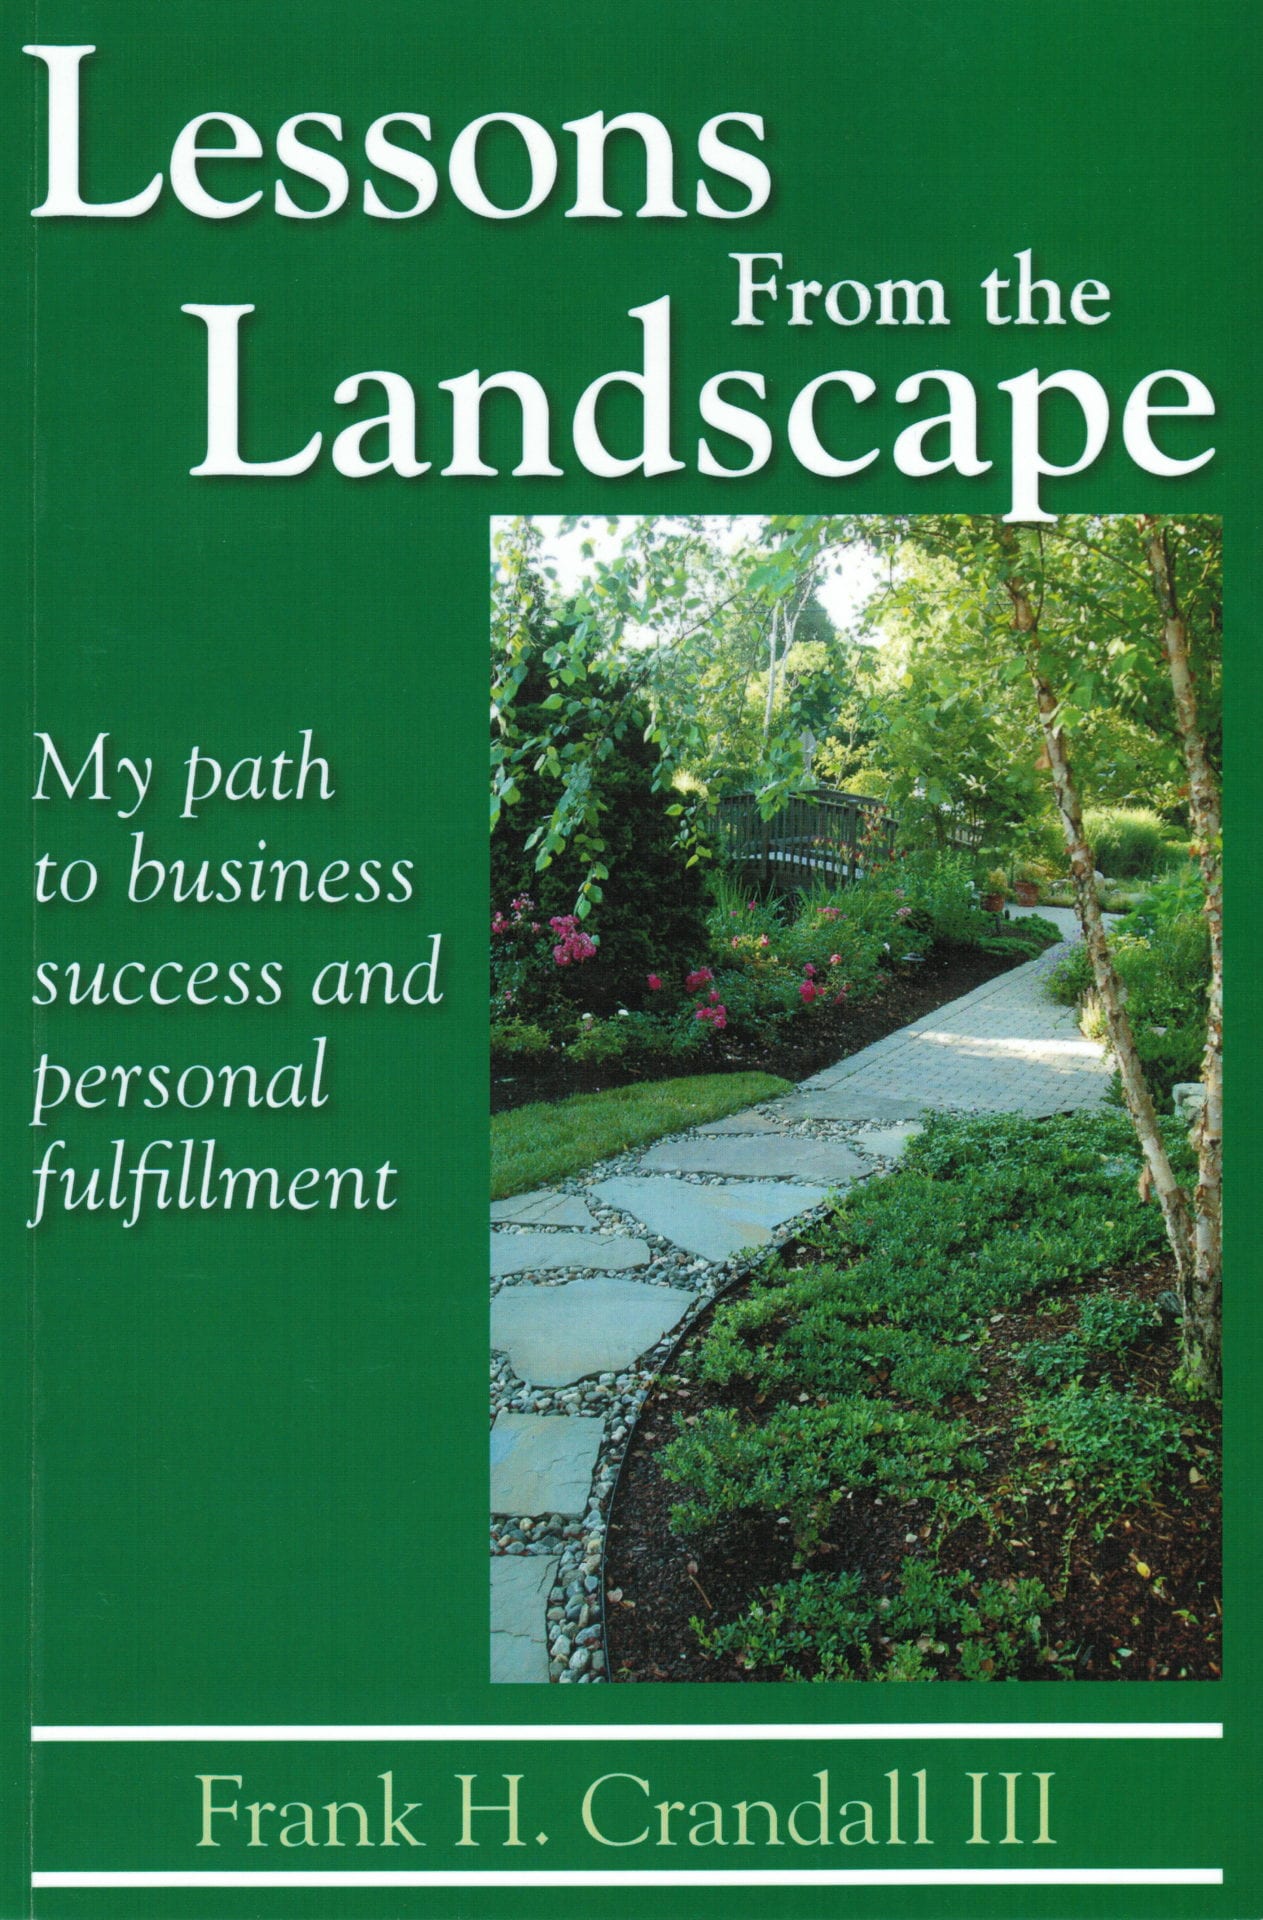 Lessons from the Landscape